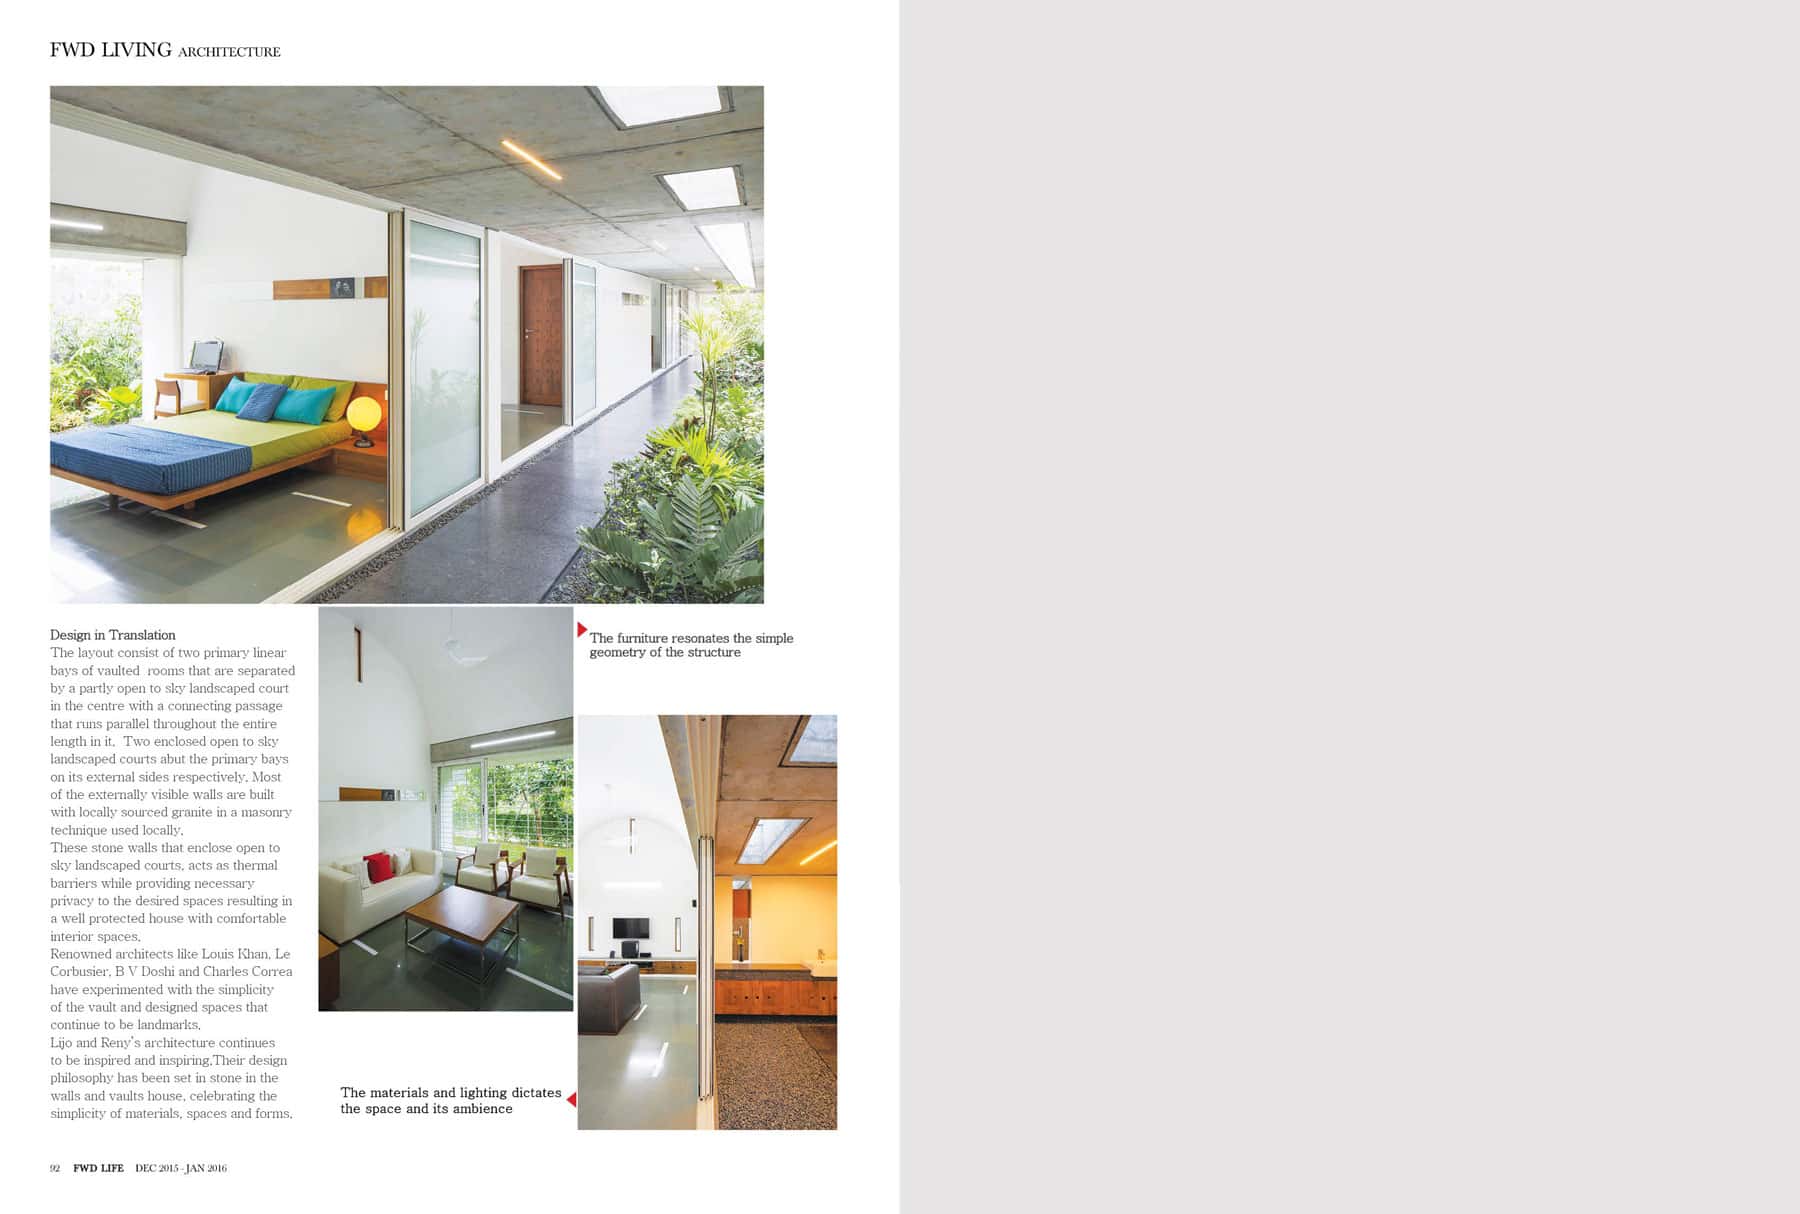 fwd-magazine-india-feature-the-walls-and-vaults-house-2